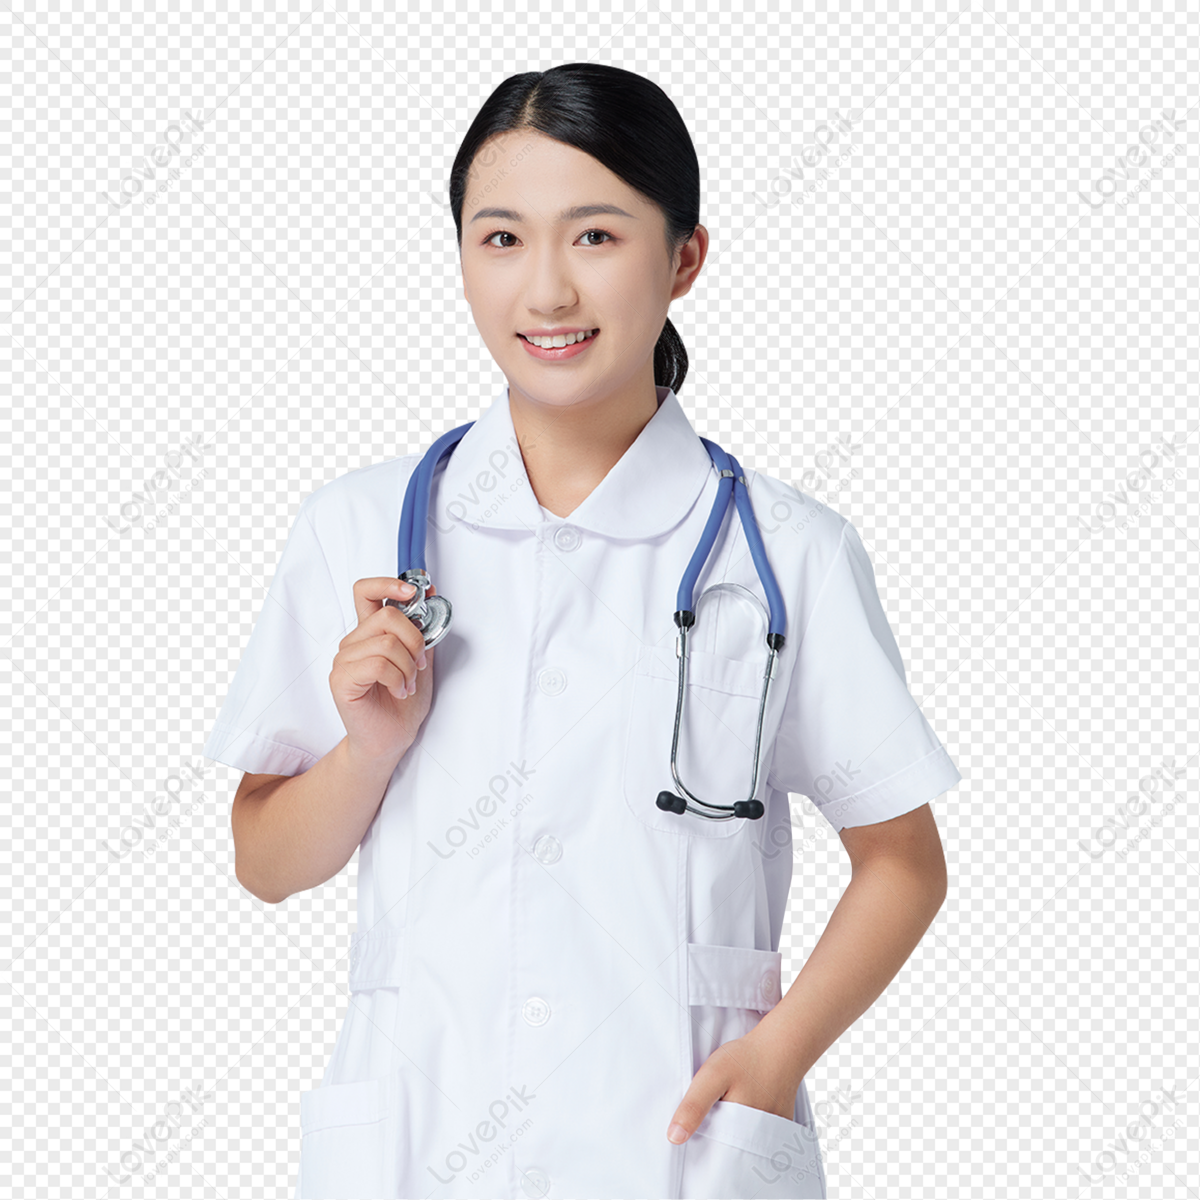 https://img.lovepik.com/free-png/20220128/lovepik-the-female-nurse-took-the-stethoscope-png-image_402014850_wh1200.png